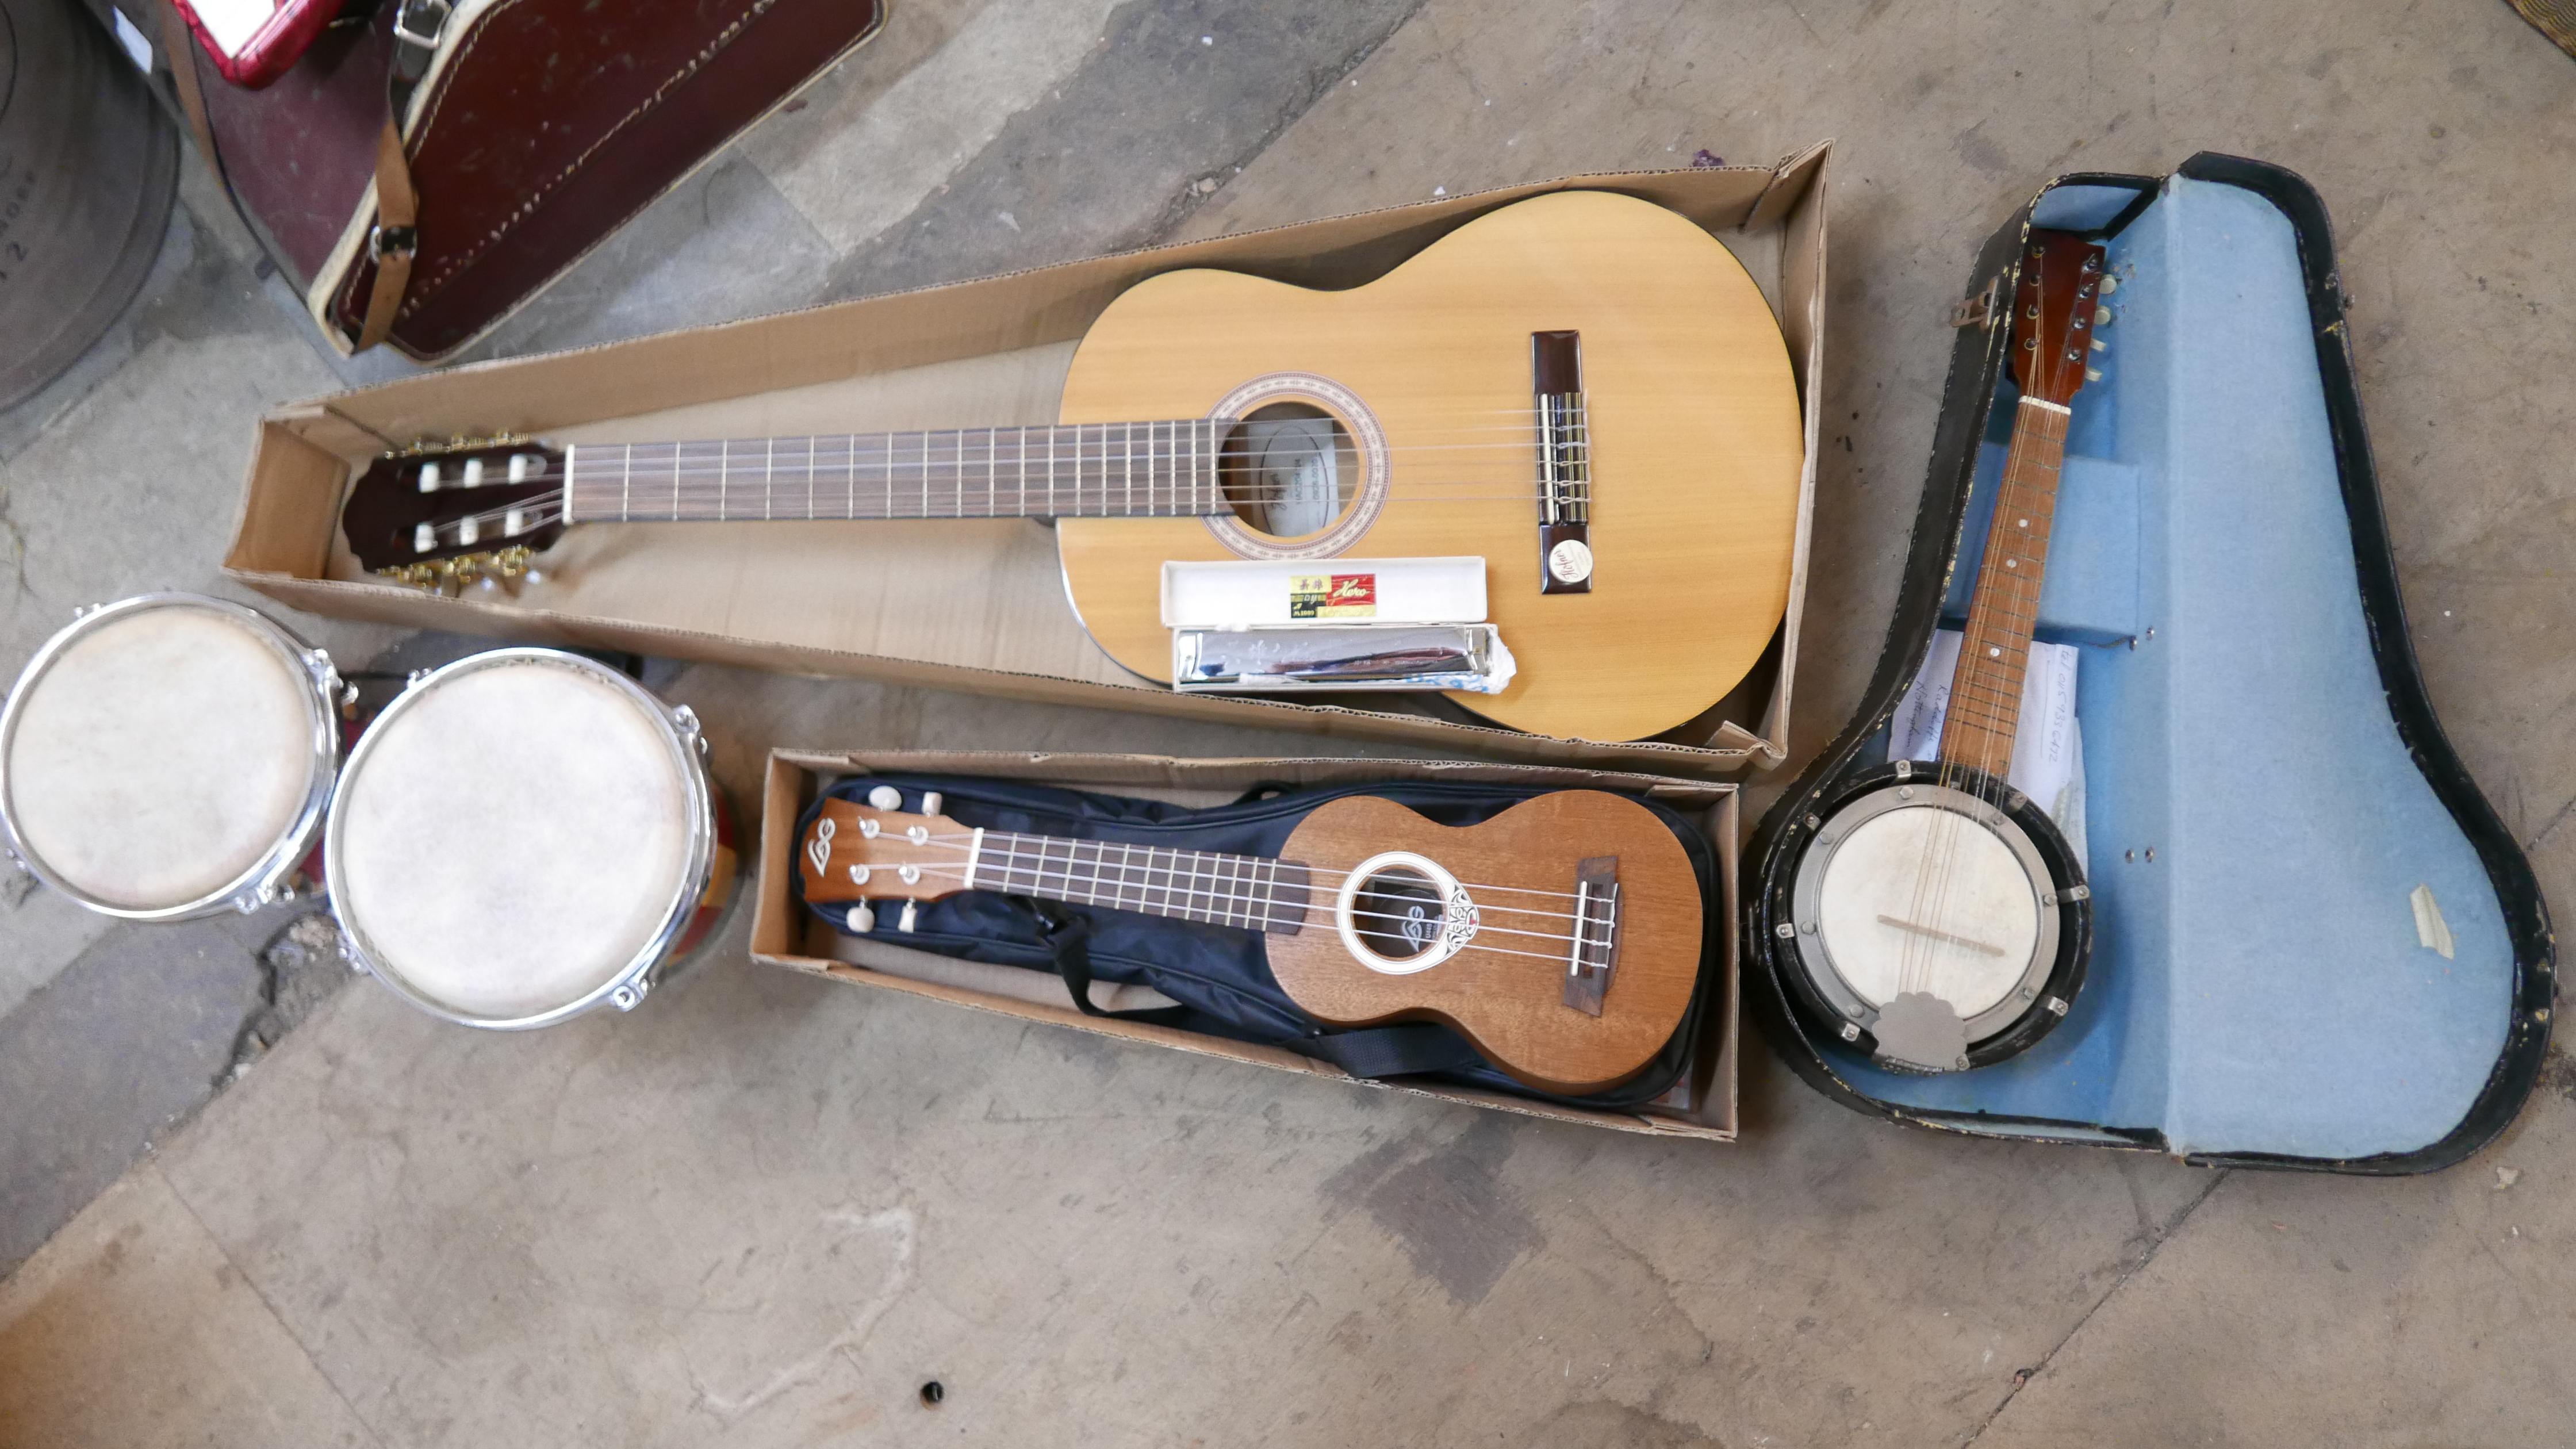 A Hofner guitar, a ukulele, pair of bongo drums, a banjo and a Haro harmonica